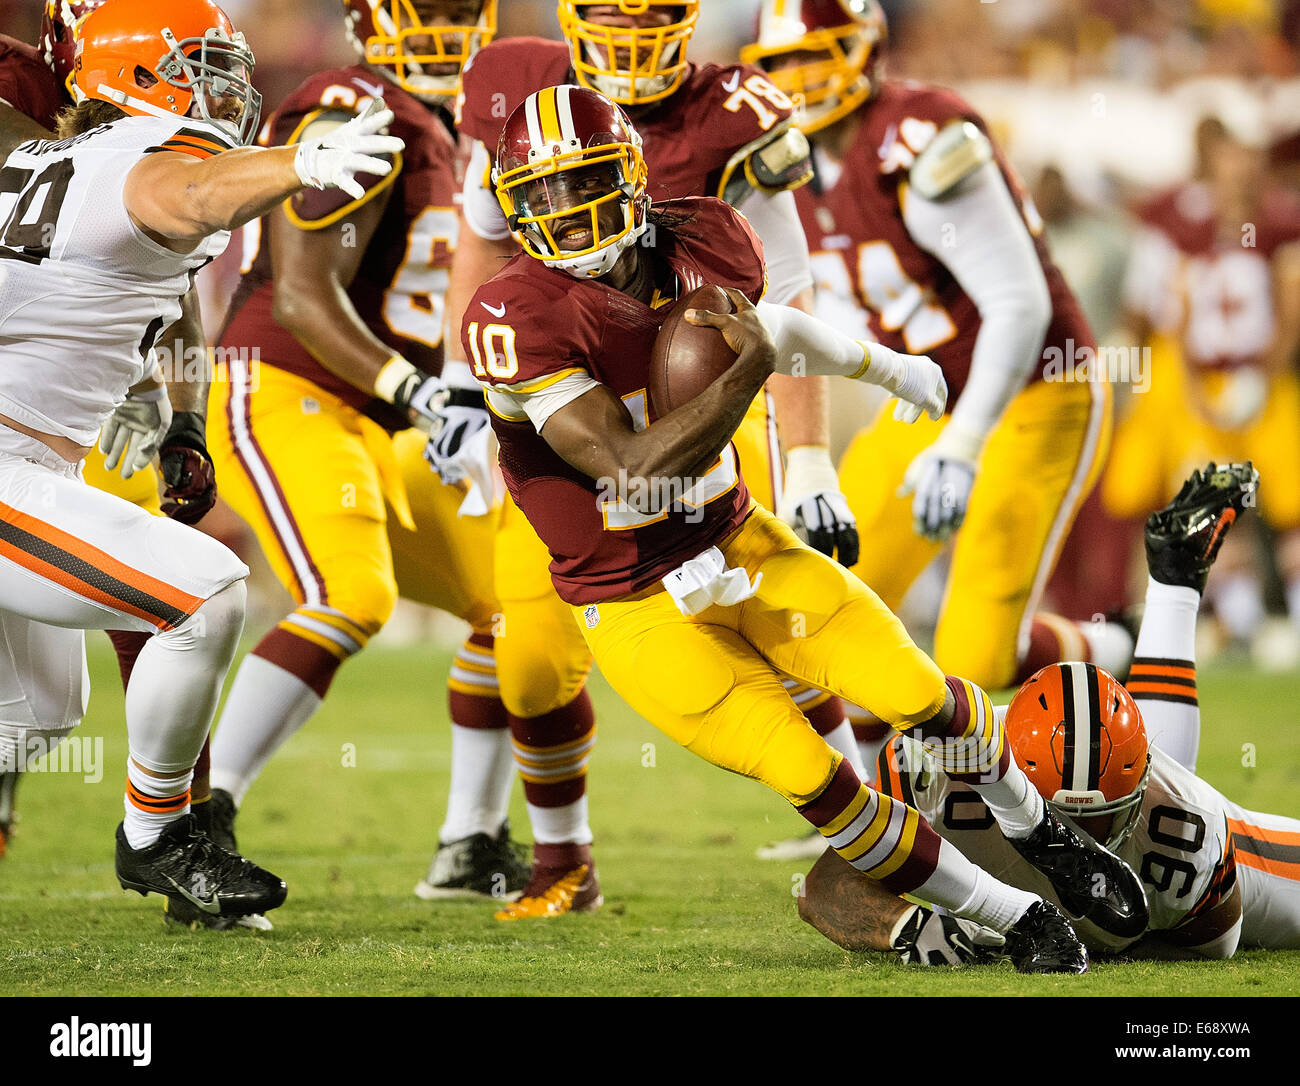 Landover, MD., US. 18th Aug, 2014. Washington Redskins quarterback Robert Griffin III (10) scrambles away from the tackle of Cleveland Browns defensive end Billy Winn (90) during the first half of their NFL preseason game at FedEx Field in Landover, MD Monday, August 18, 2014. Credit:  Harry Walker/Alamy Live News Stock Photo